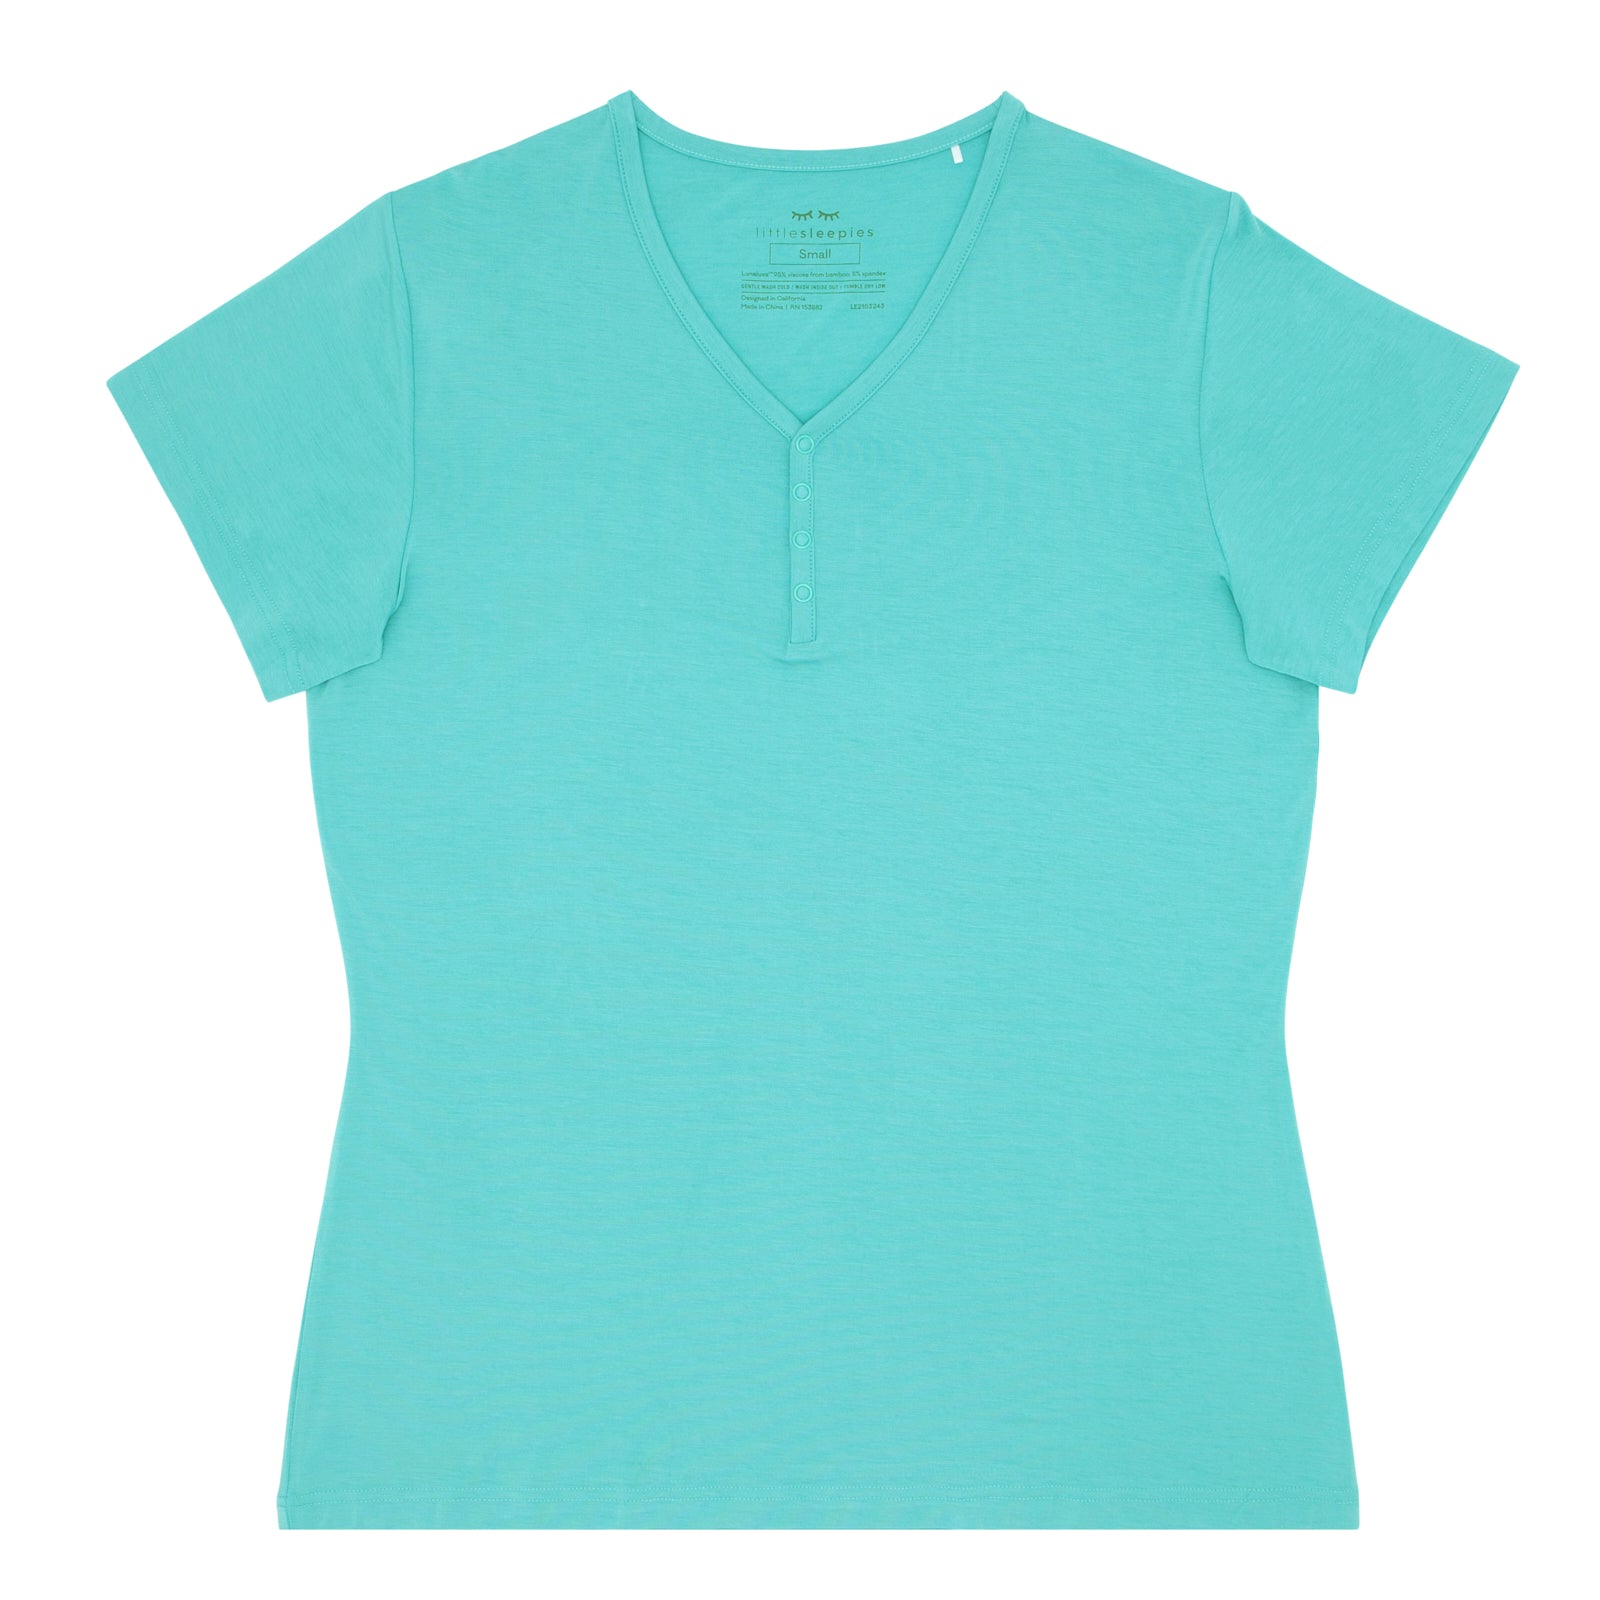 Flat lay image of a women's Glacier Turquoise short sleeve pajama top